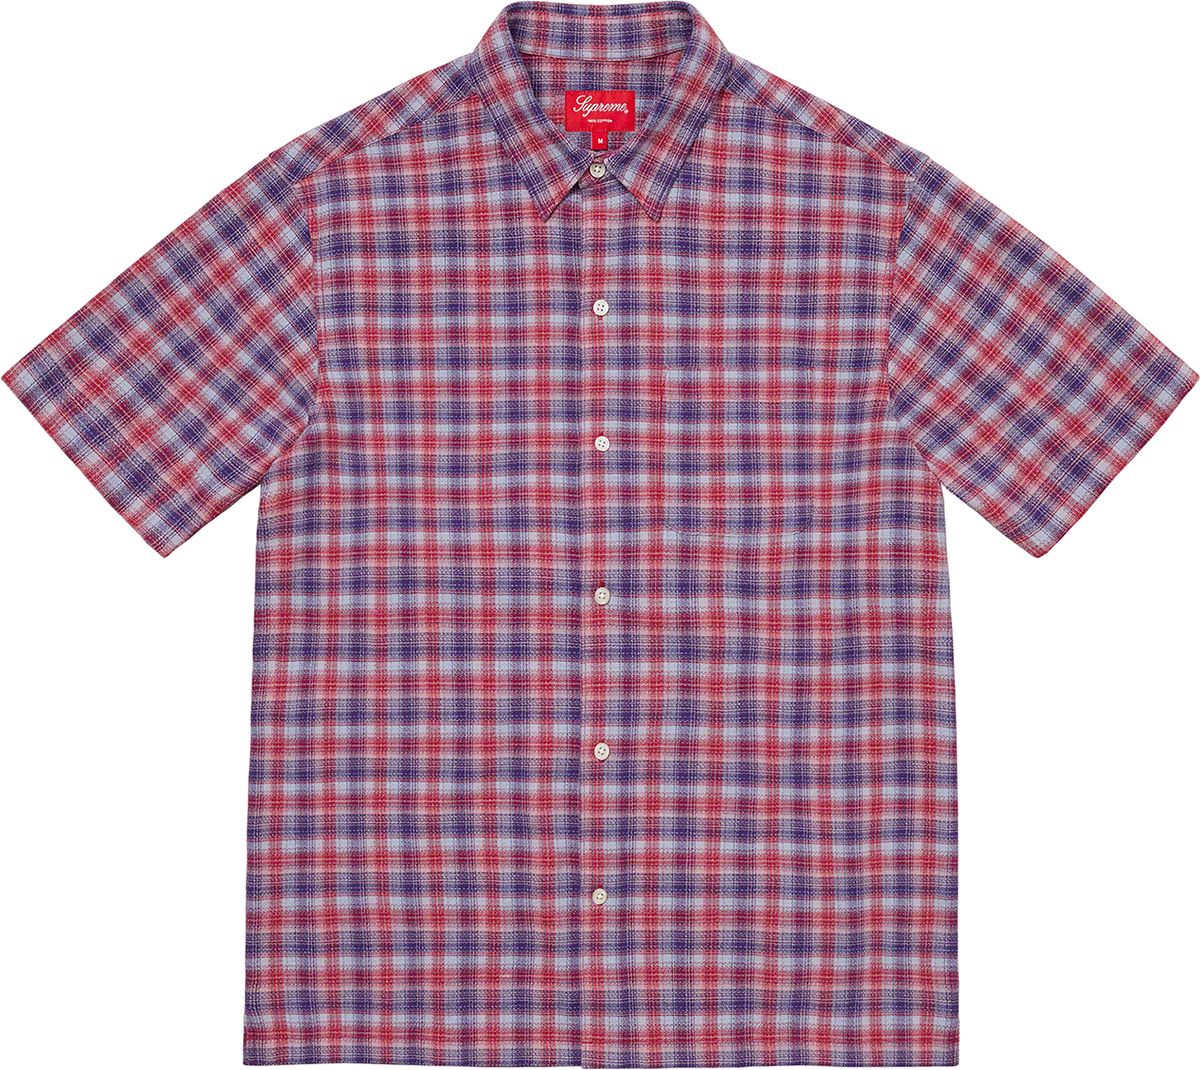 Nate Lowman S/S Shirt - Spring/Summer 2022 Preview – Supreme